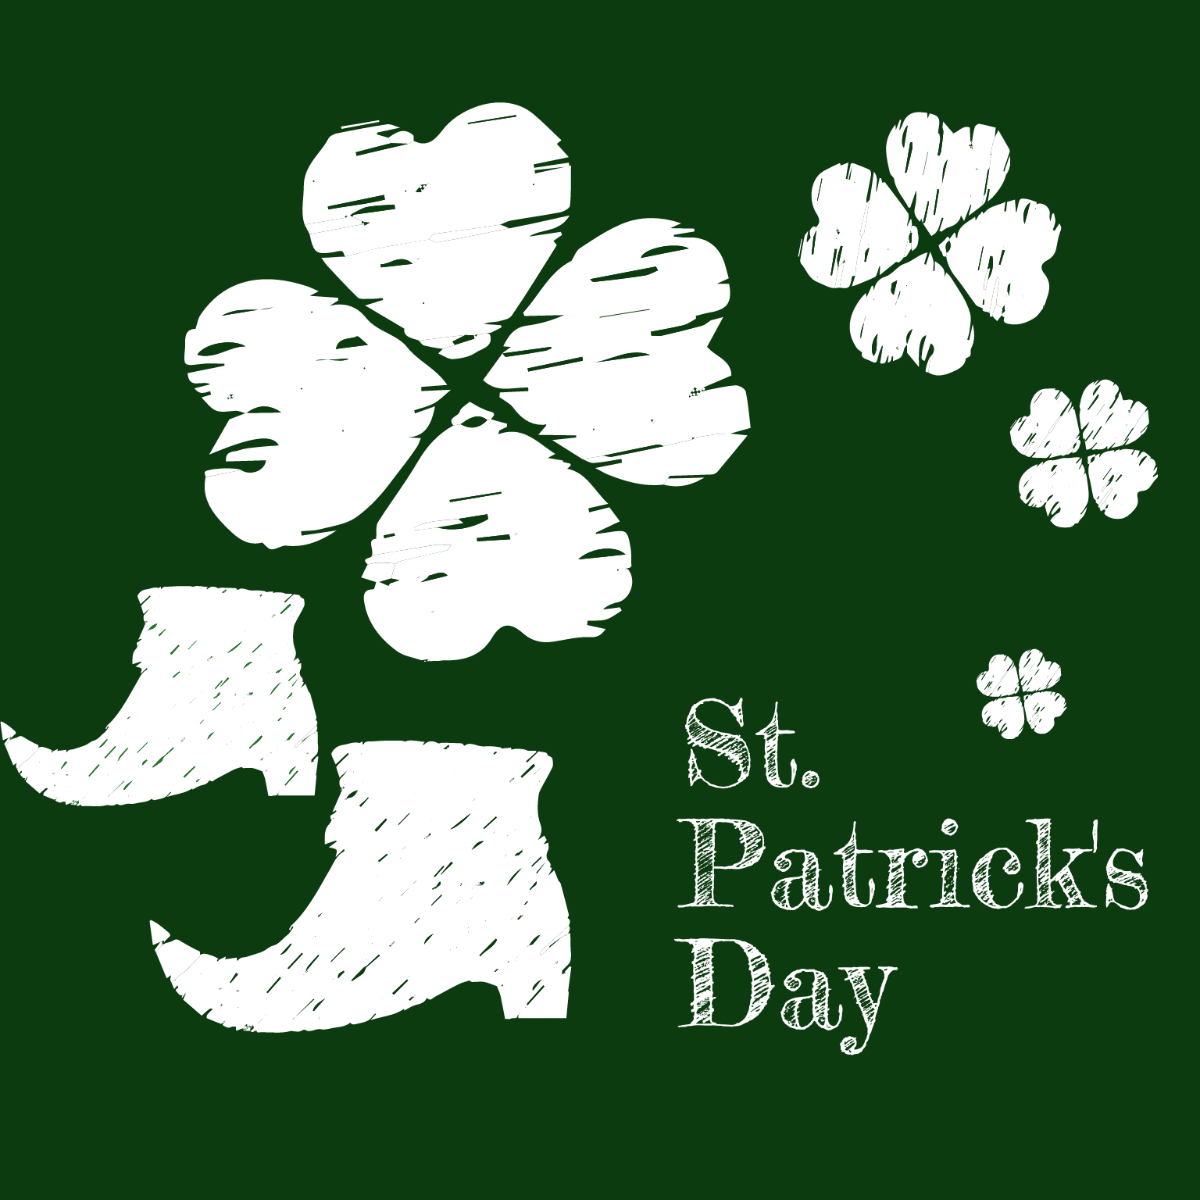 Free St. Patrick's Day Chalk Design Vector Template